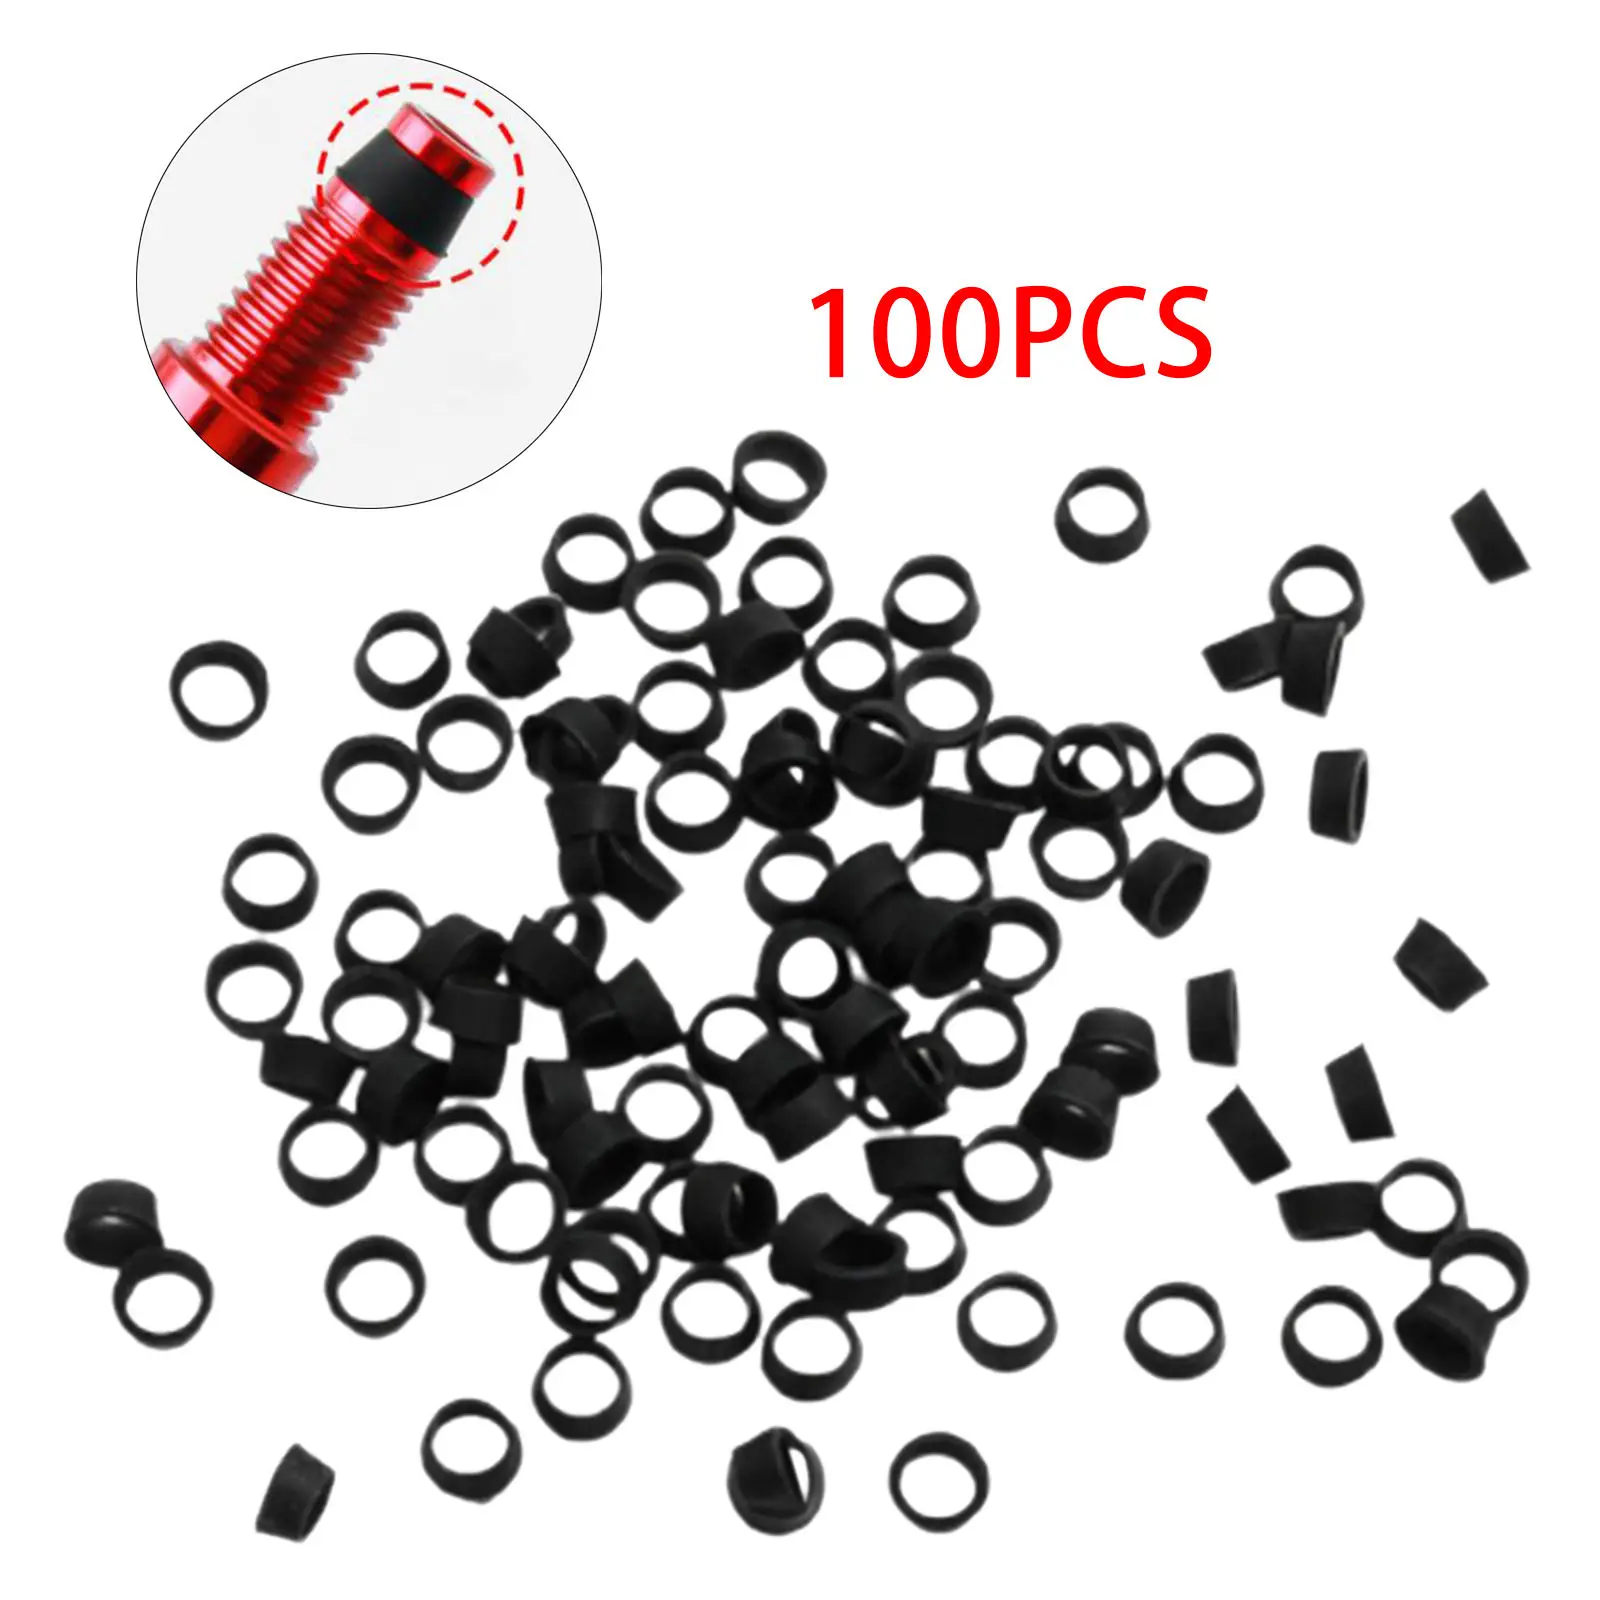 100Pcs Valve Extender Sealing Ring Removable Inner Tube Accessories